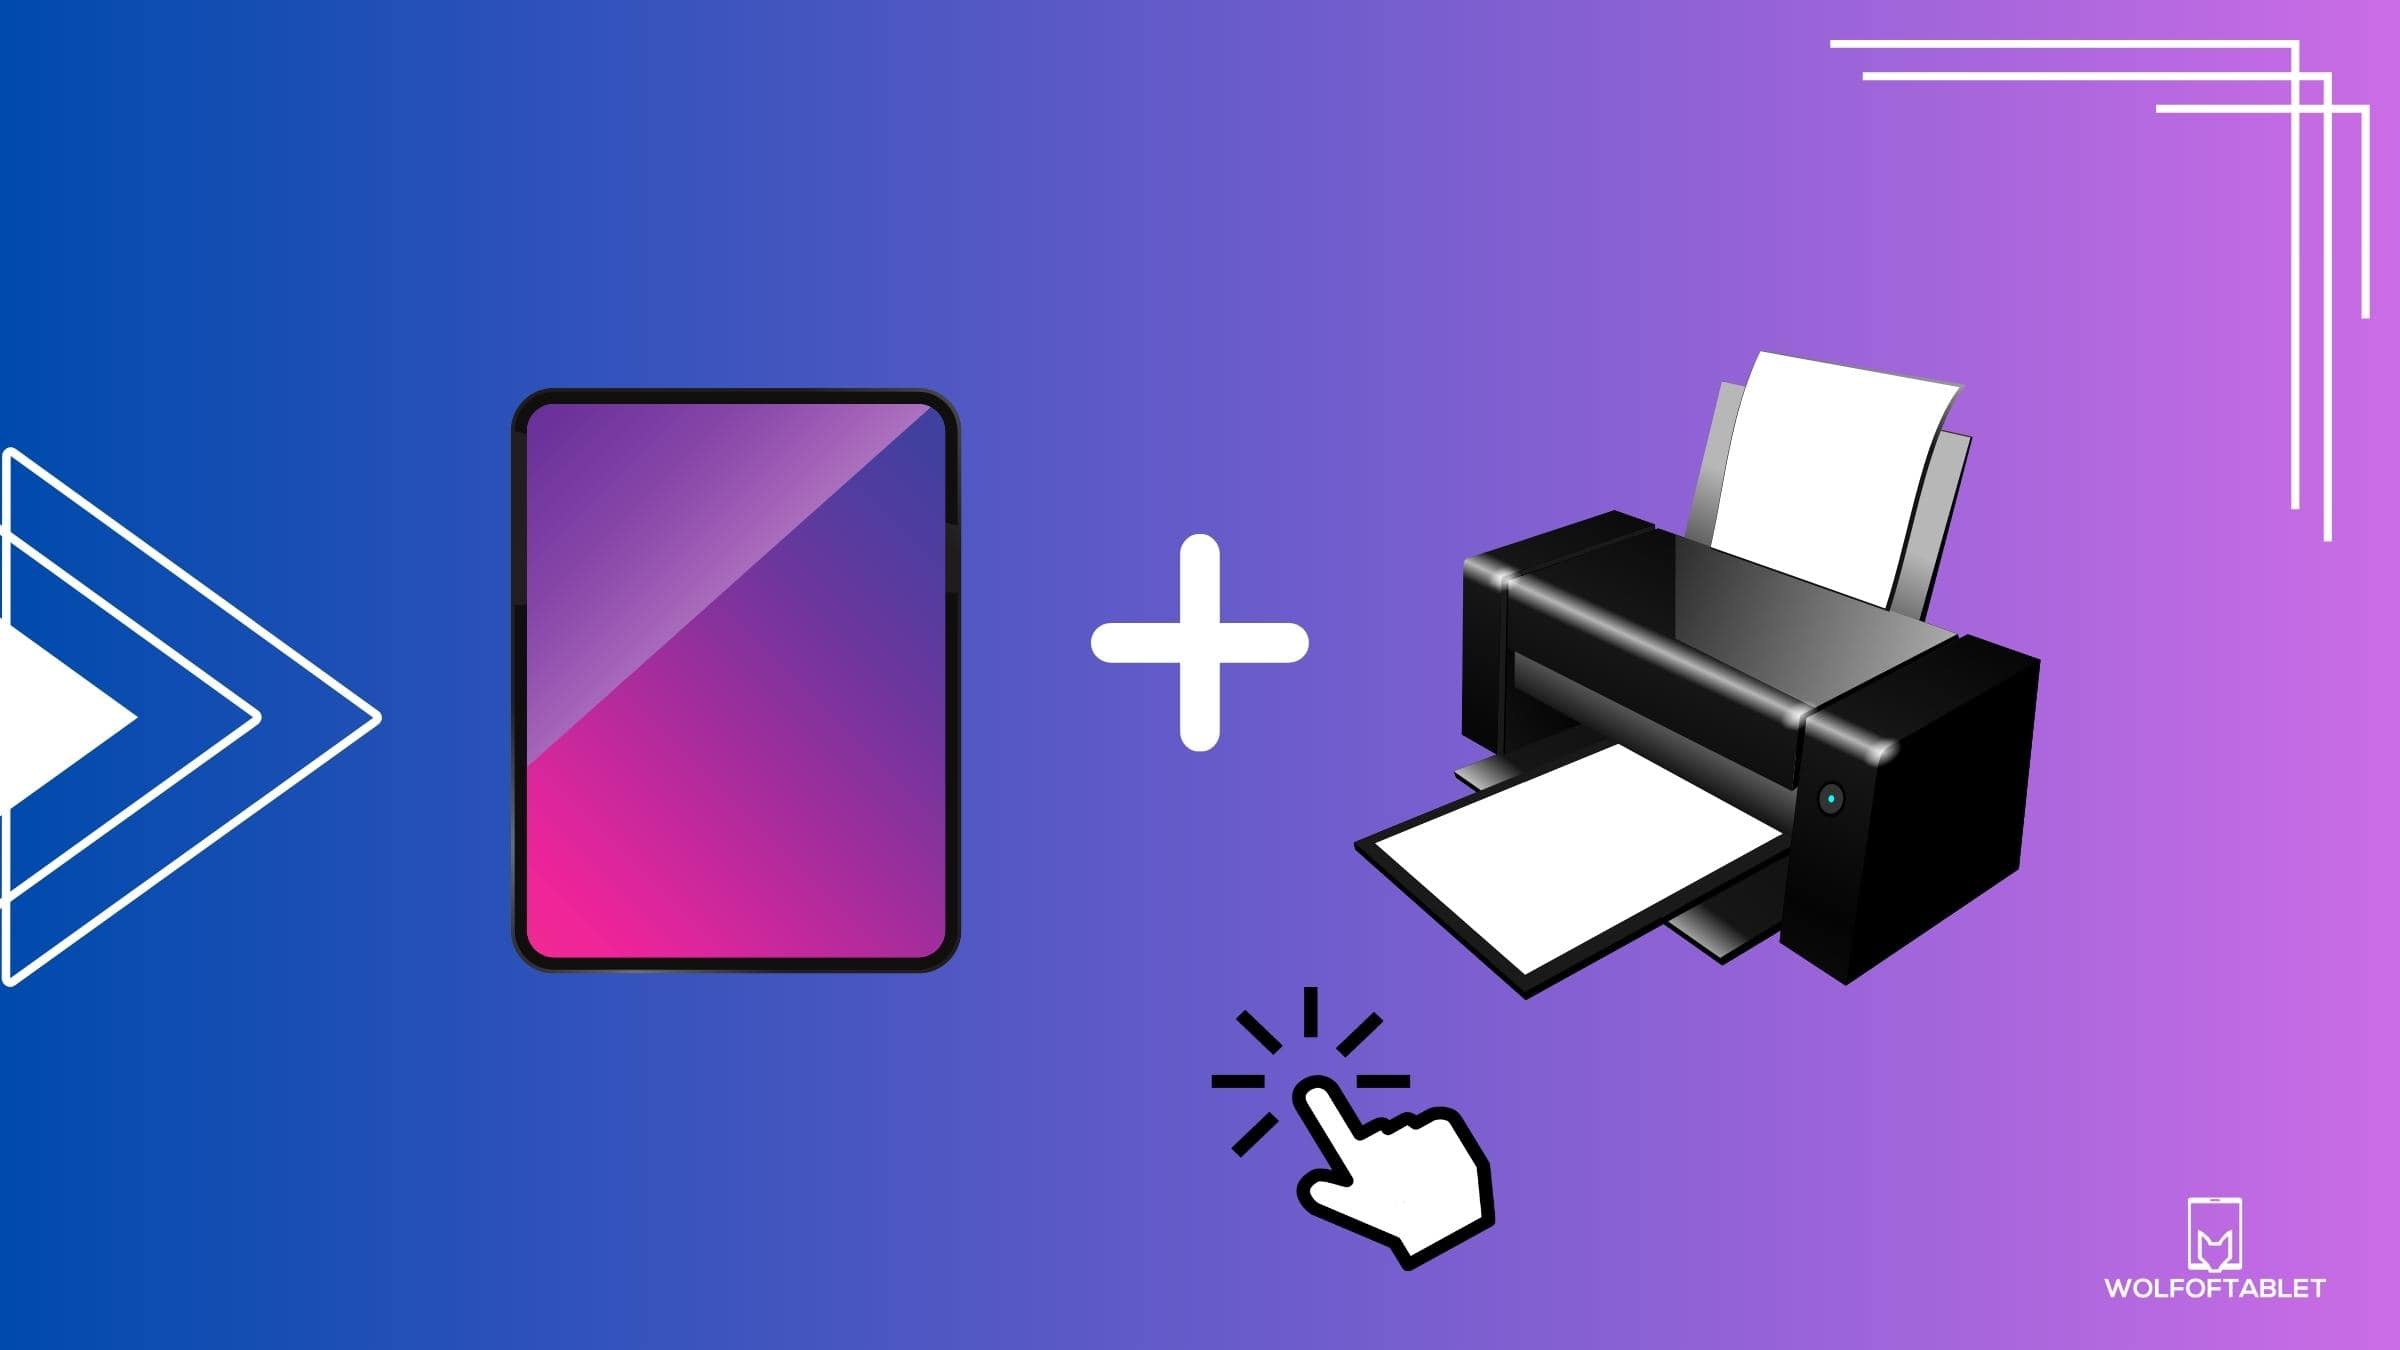 how to add printer to ipad- also top recommended ipad printers - top 3 picks